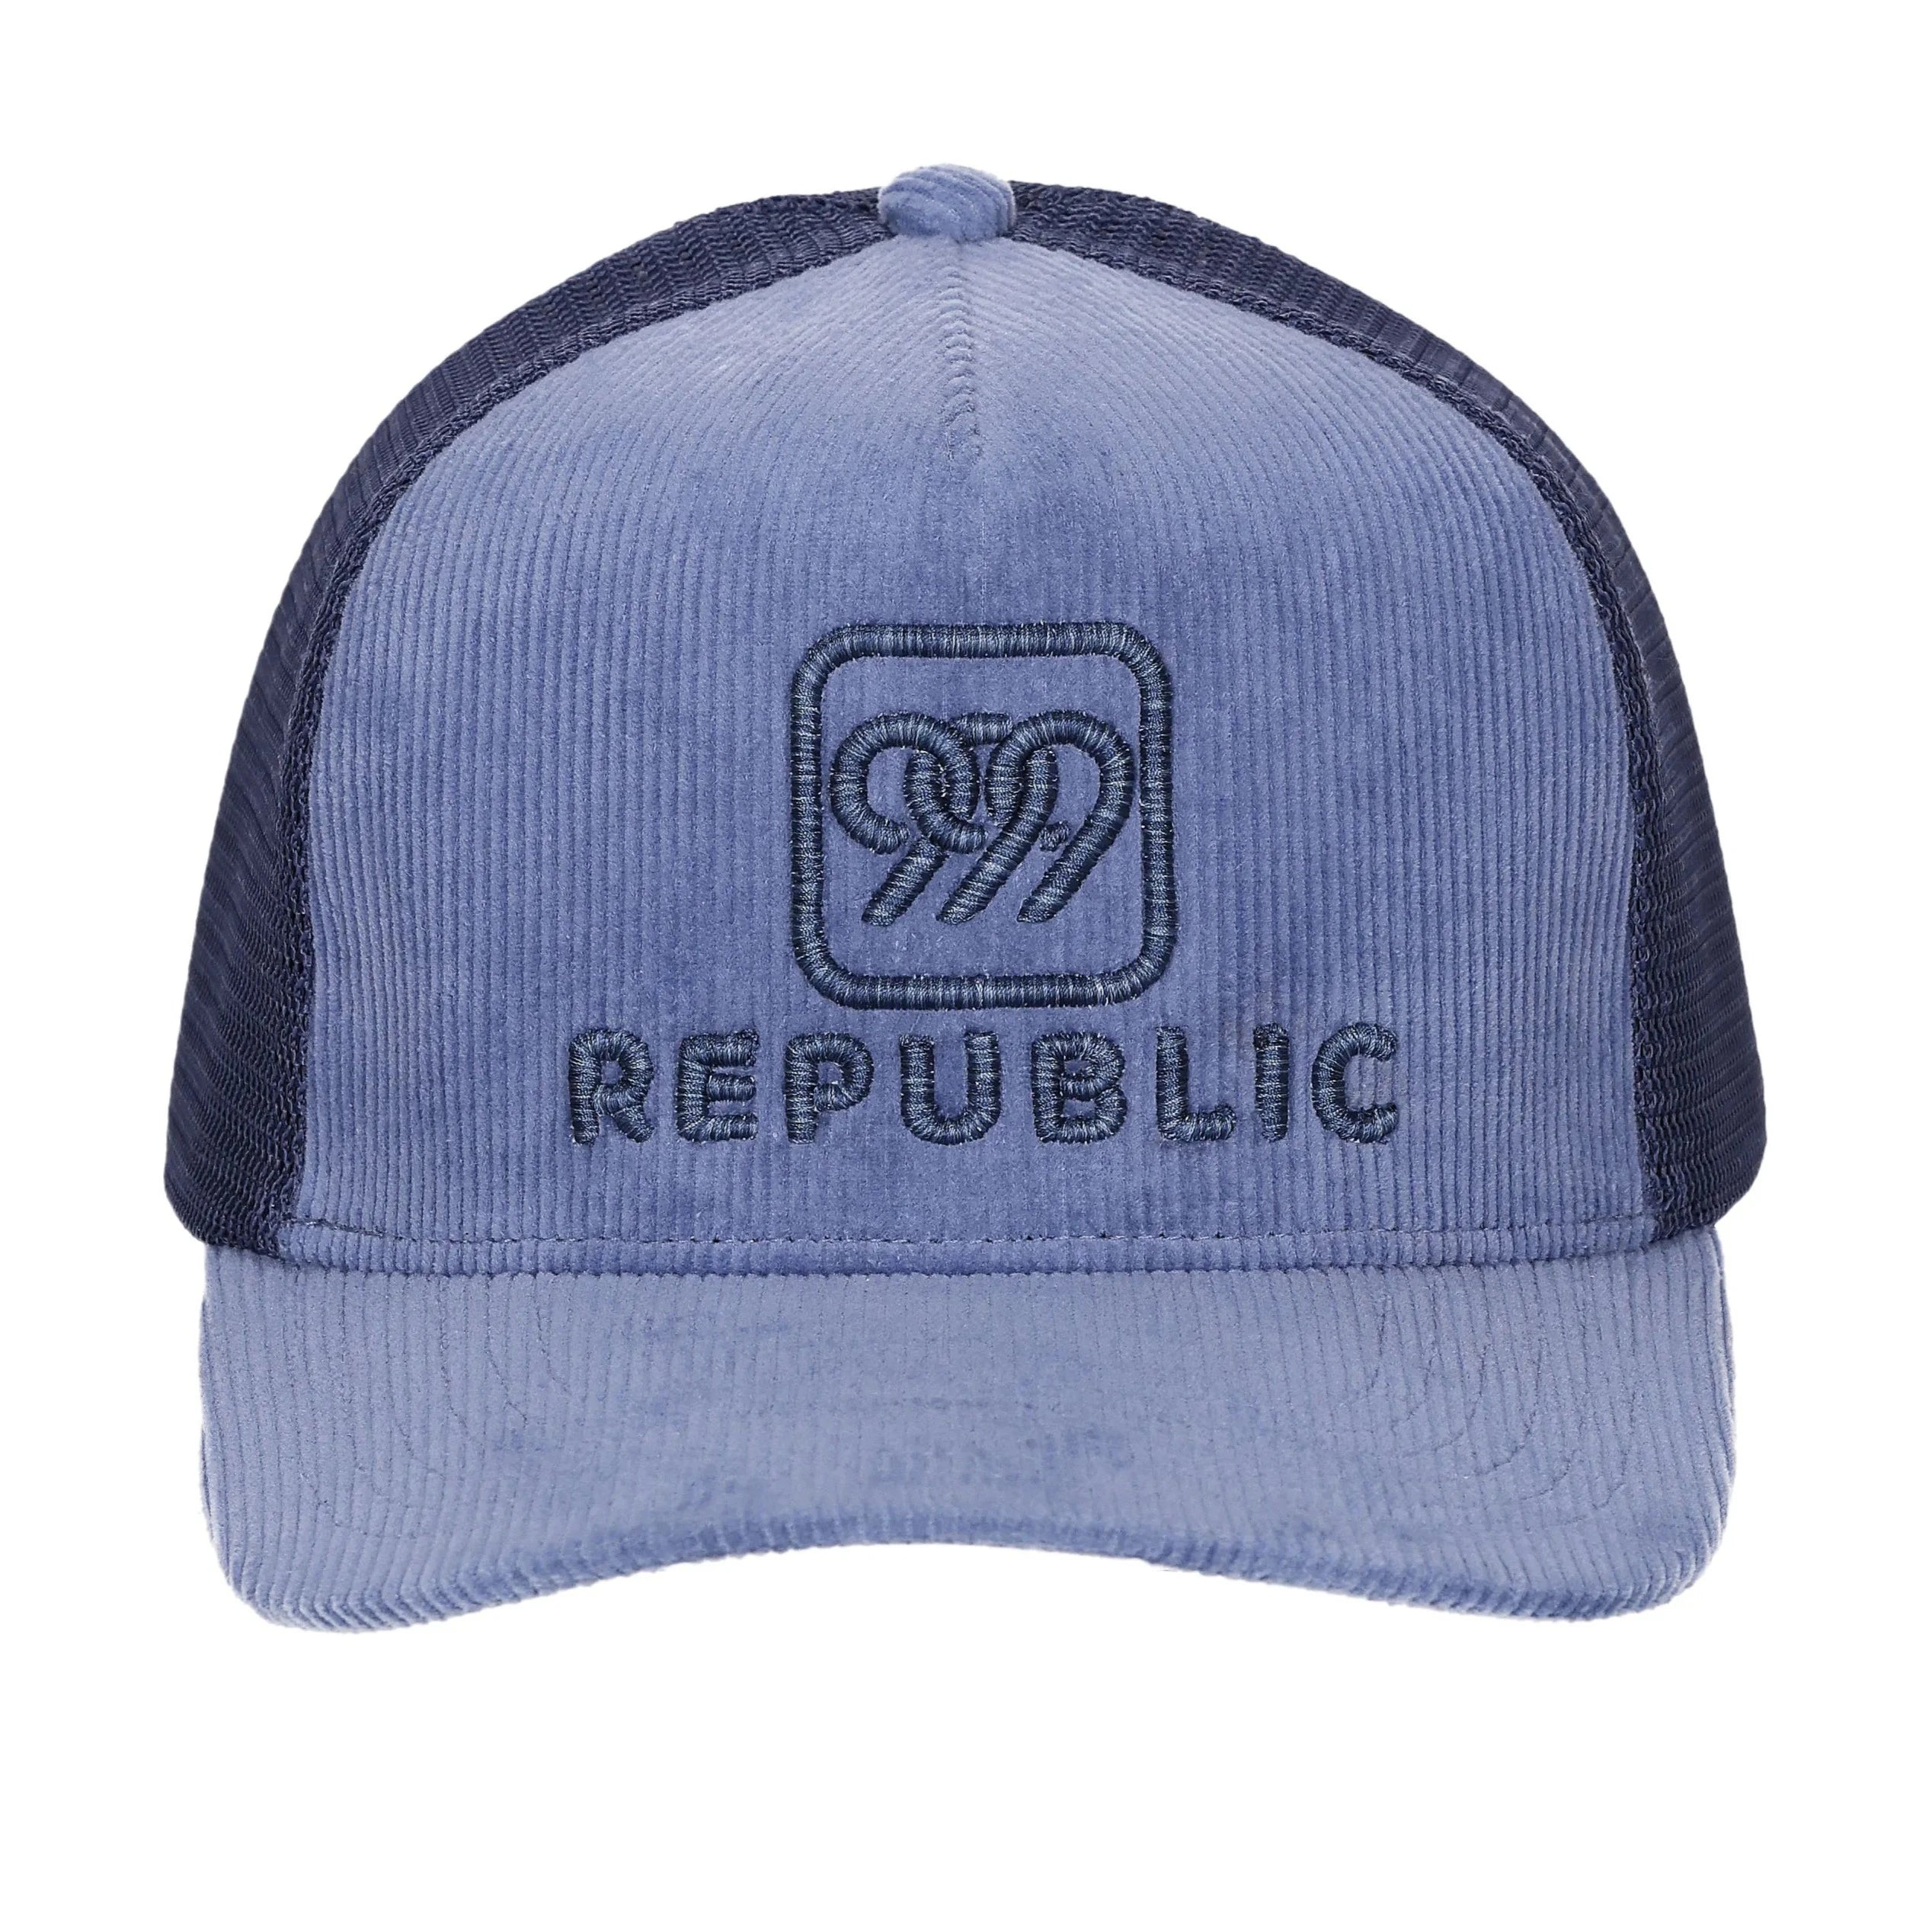 999Republic logo embroidered with Multicoloured Thread on a Blue coloured Trucker cap